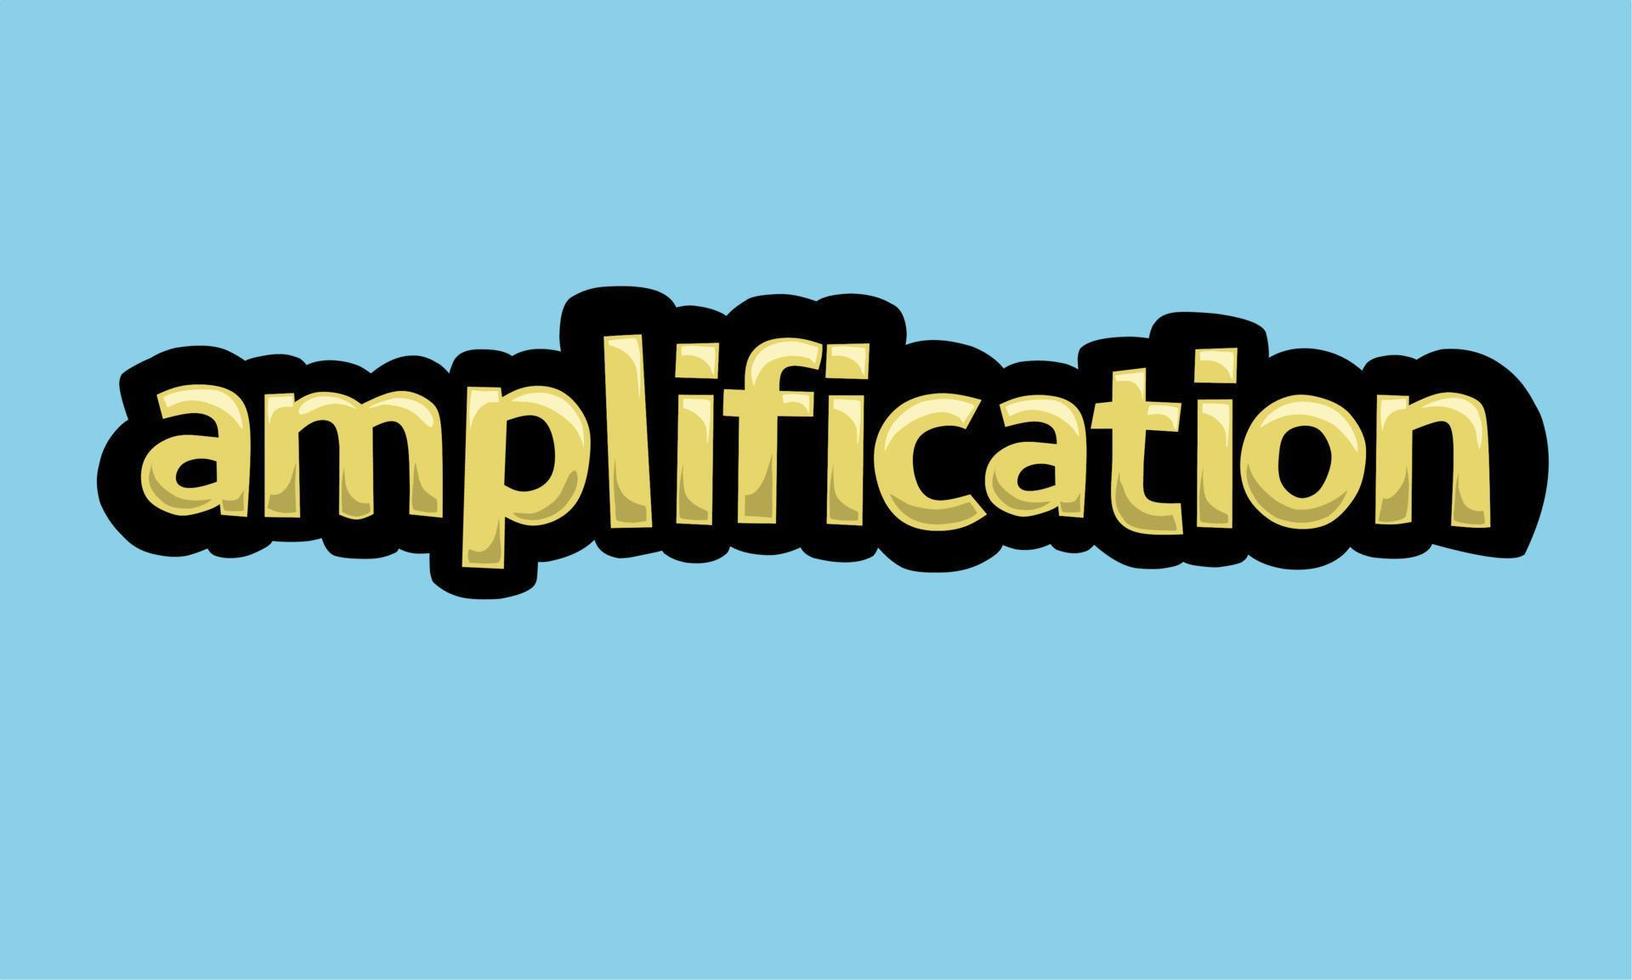 AMPLIFICATION writing vector design on a blue background